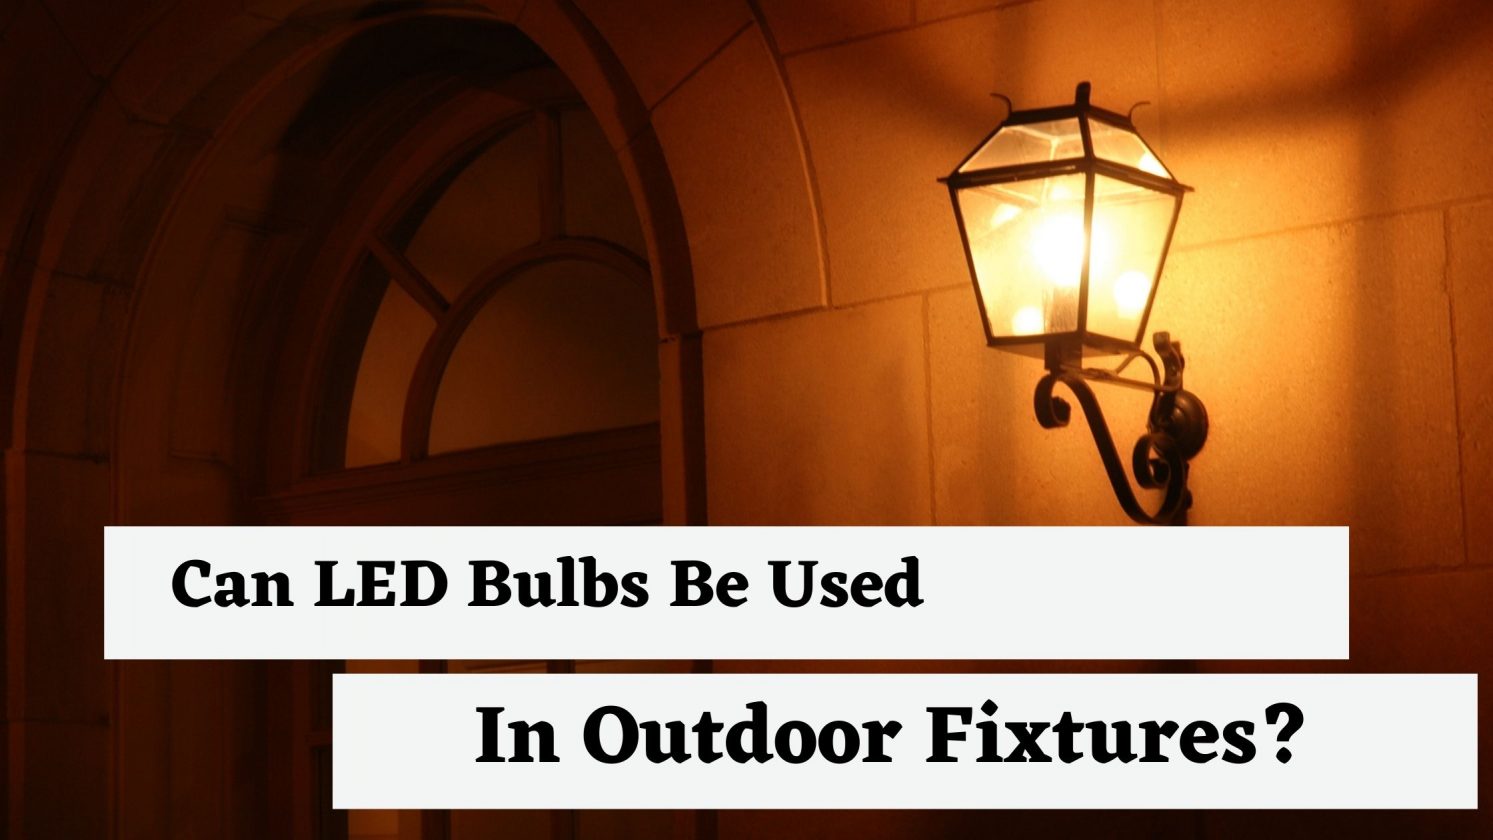 Can LED Bulbs Be Used In Outdoor Fixtures?